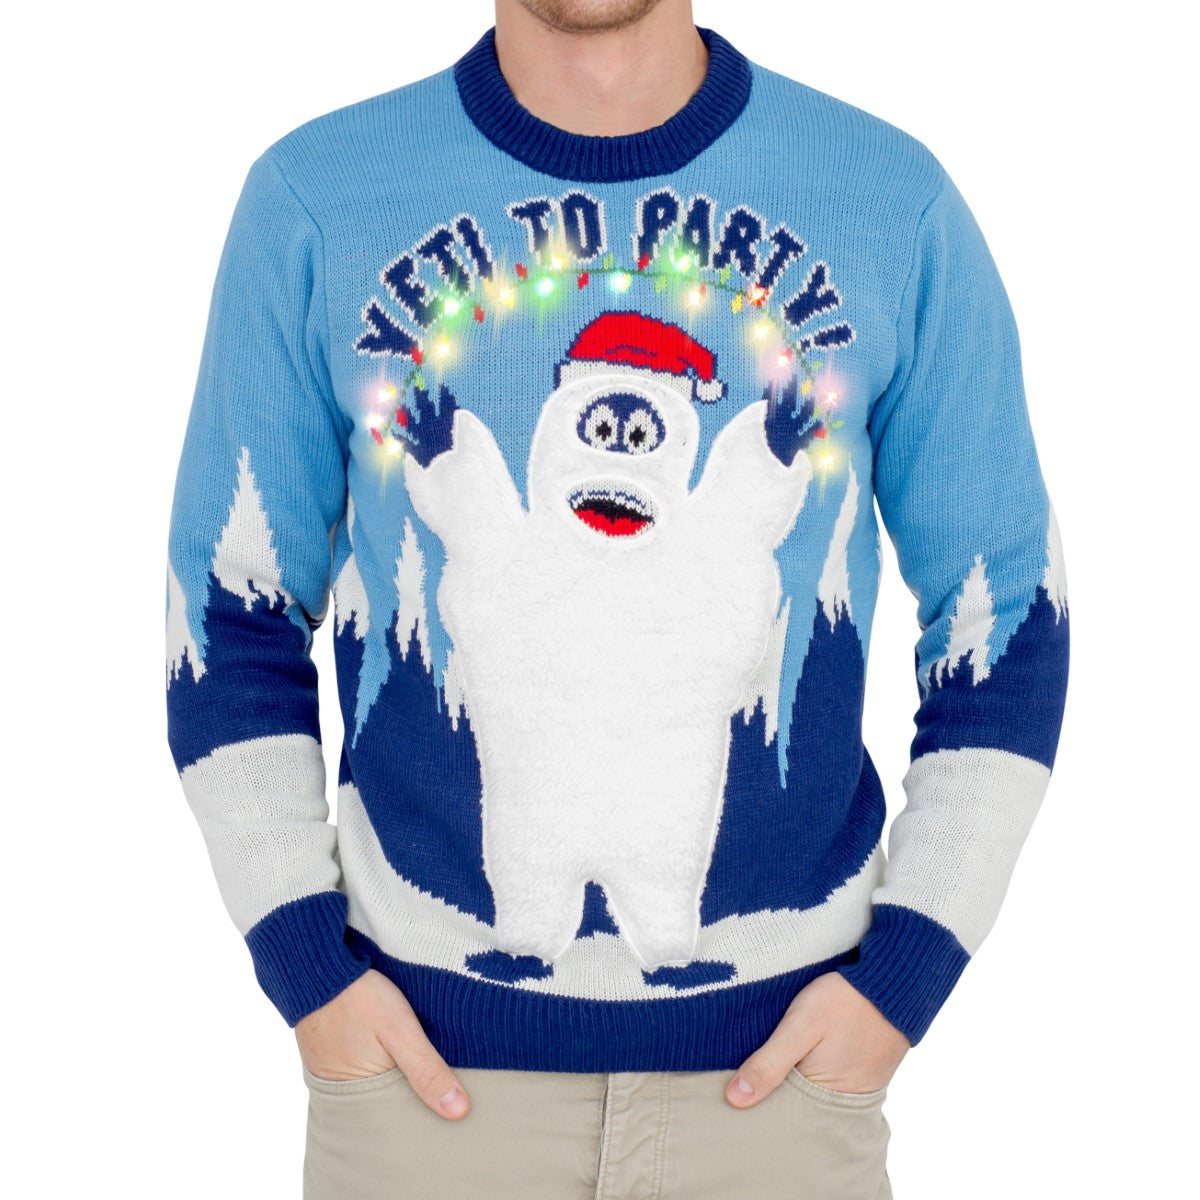 Yeti to Party Light Up LED Ugly Christmas Sweater - L